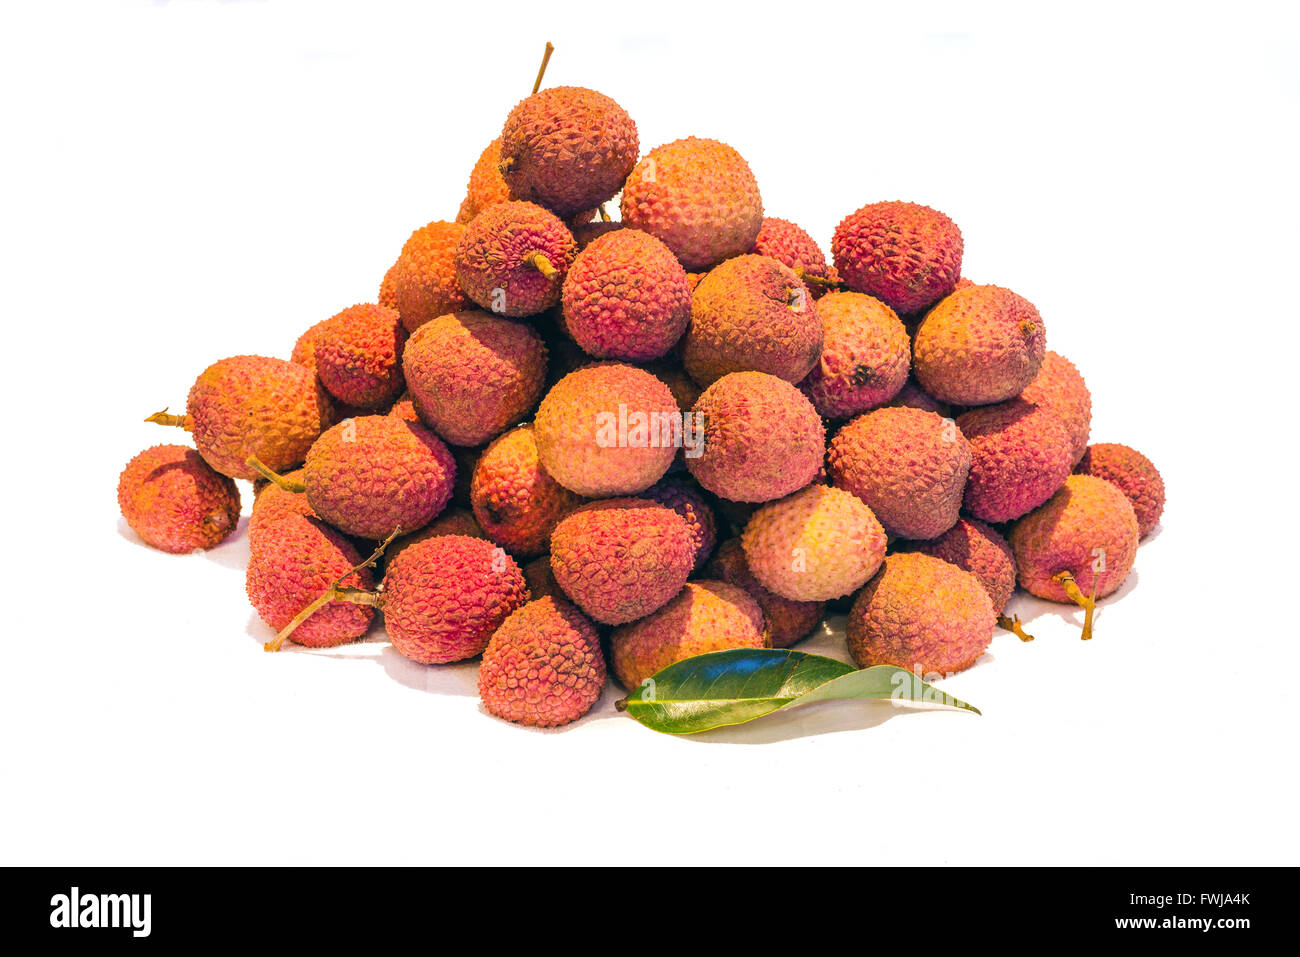 Mound of Lychees (Litchi chinensis) on a white background. Also known as Litchi, Laichi or Lichu. Stock Photo